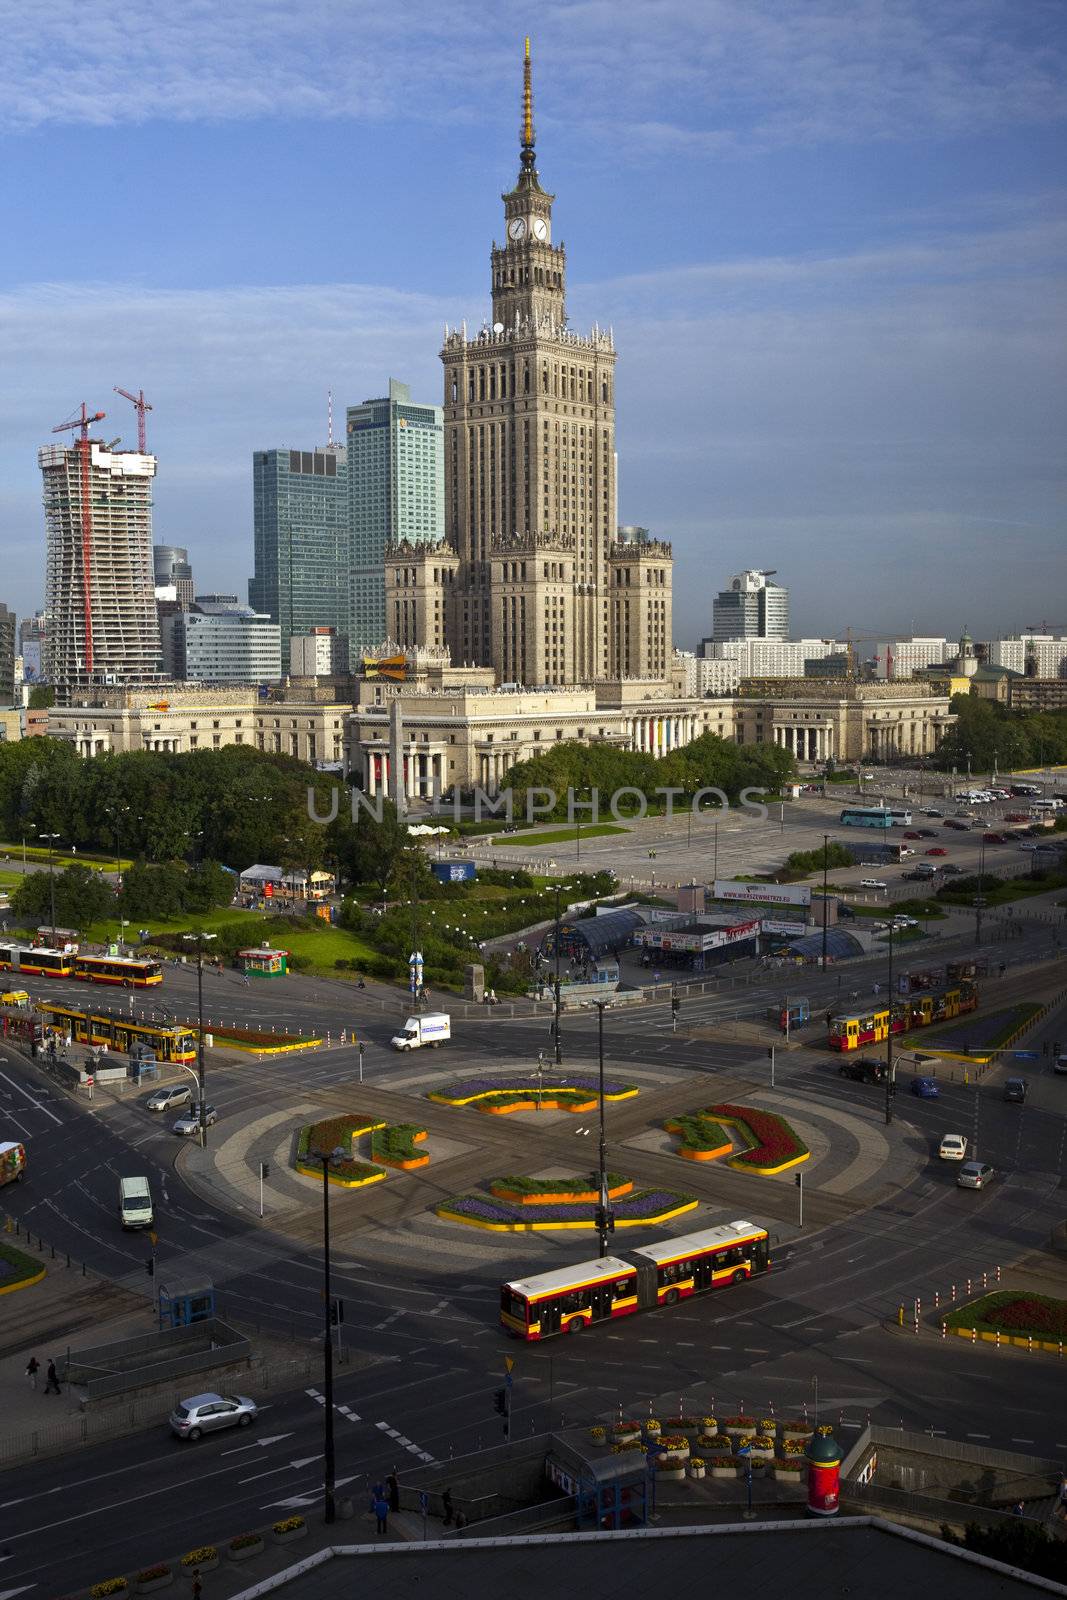 Palace of Culture and Science in Warsaw.